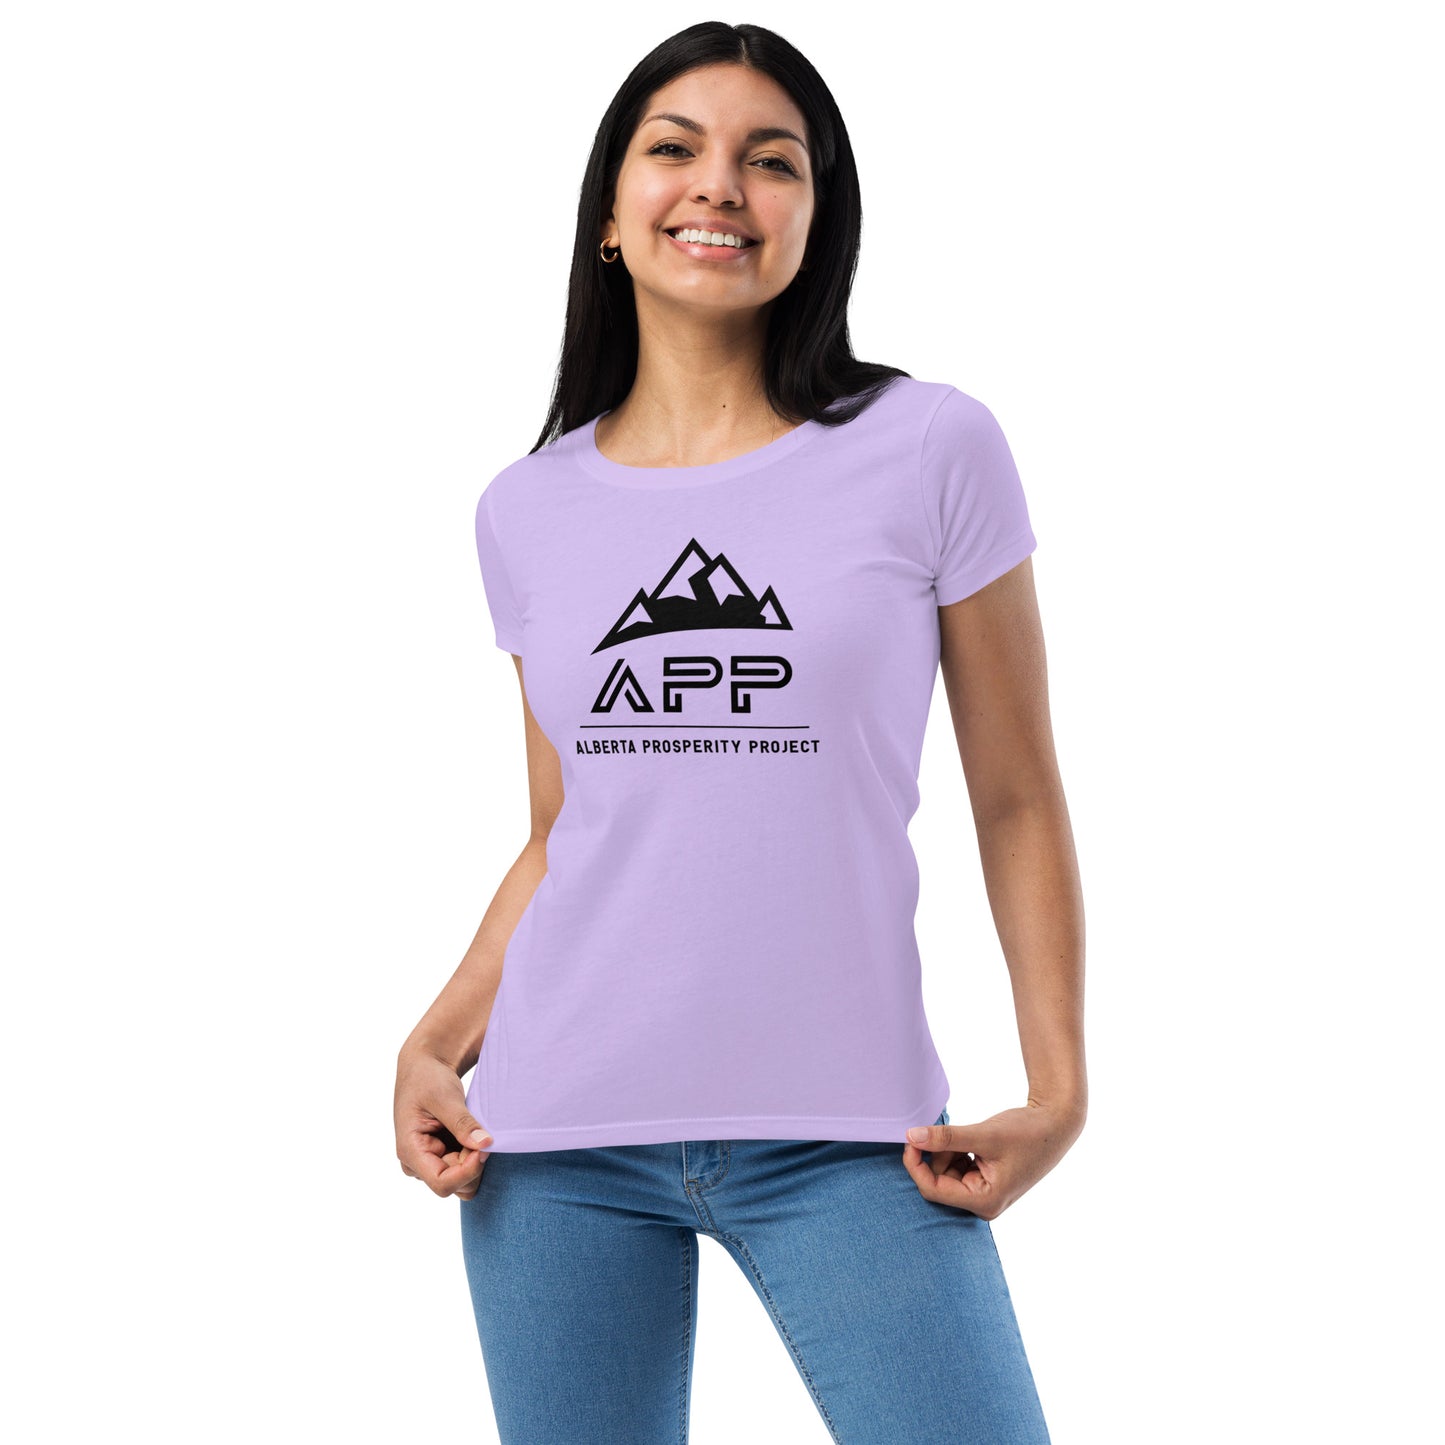 APP Women’s fitted t-shirt